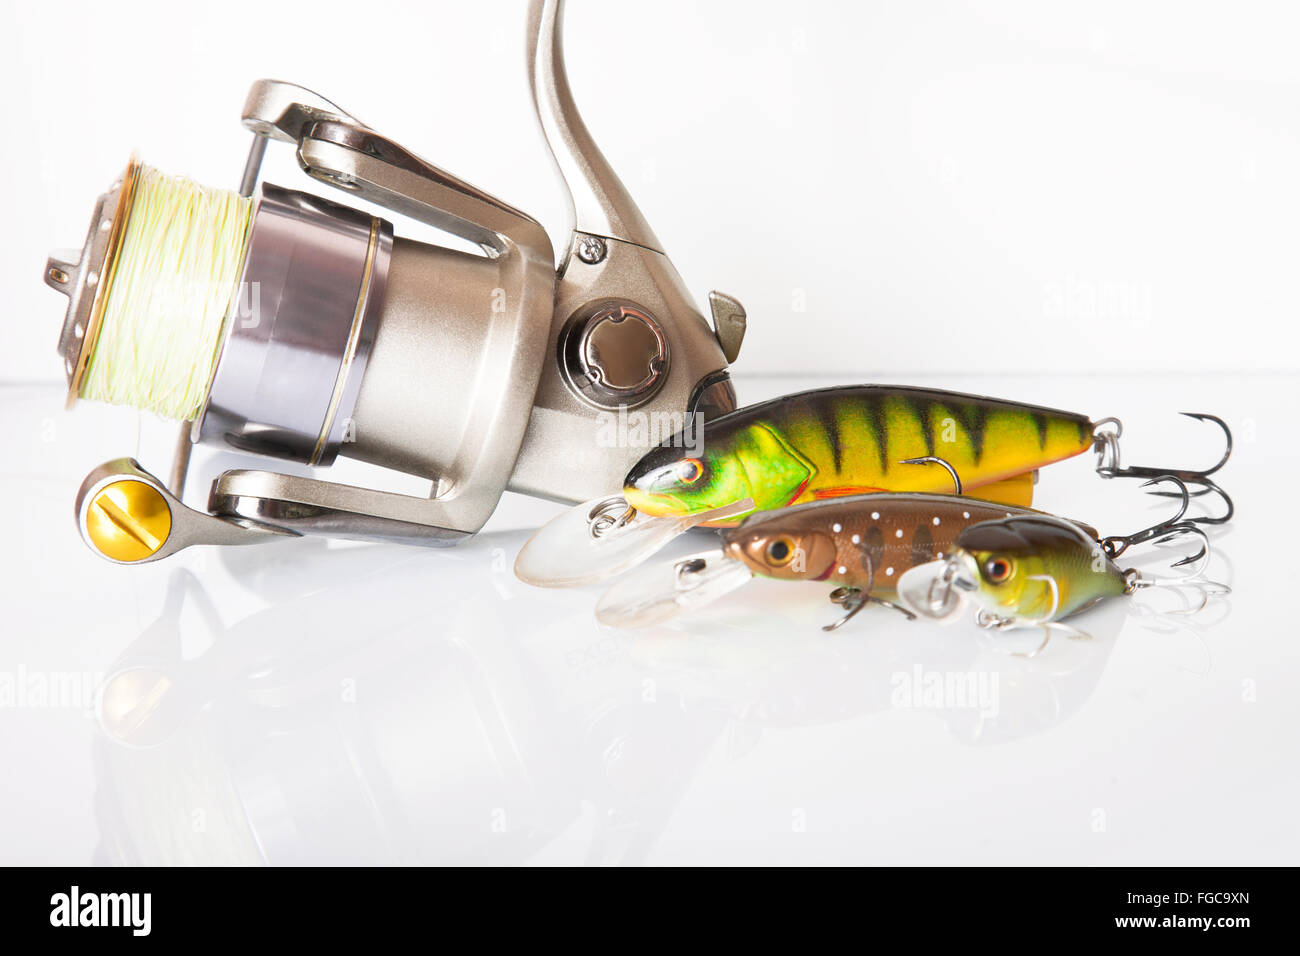 Spinning rod and reel with wobbler lure Stock Photo